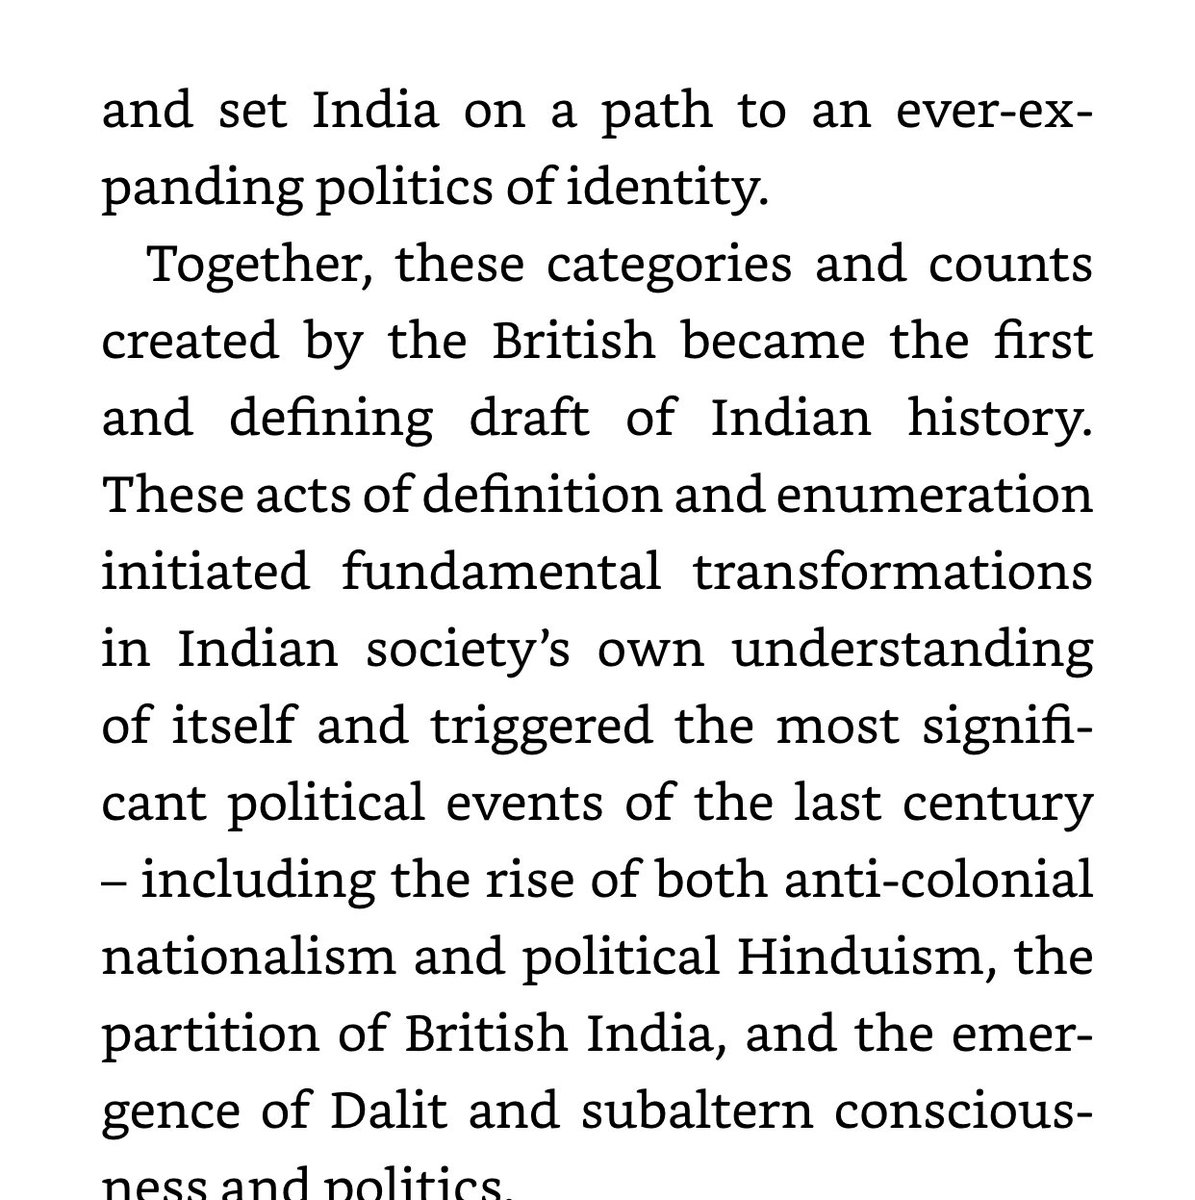 The book is promising to unpack how colonial rule has shaped even created the Hinduism that many of us are teaching about in our classrooms